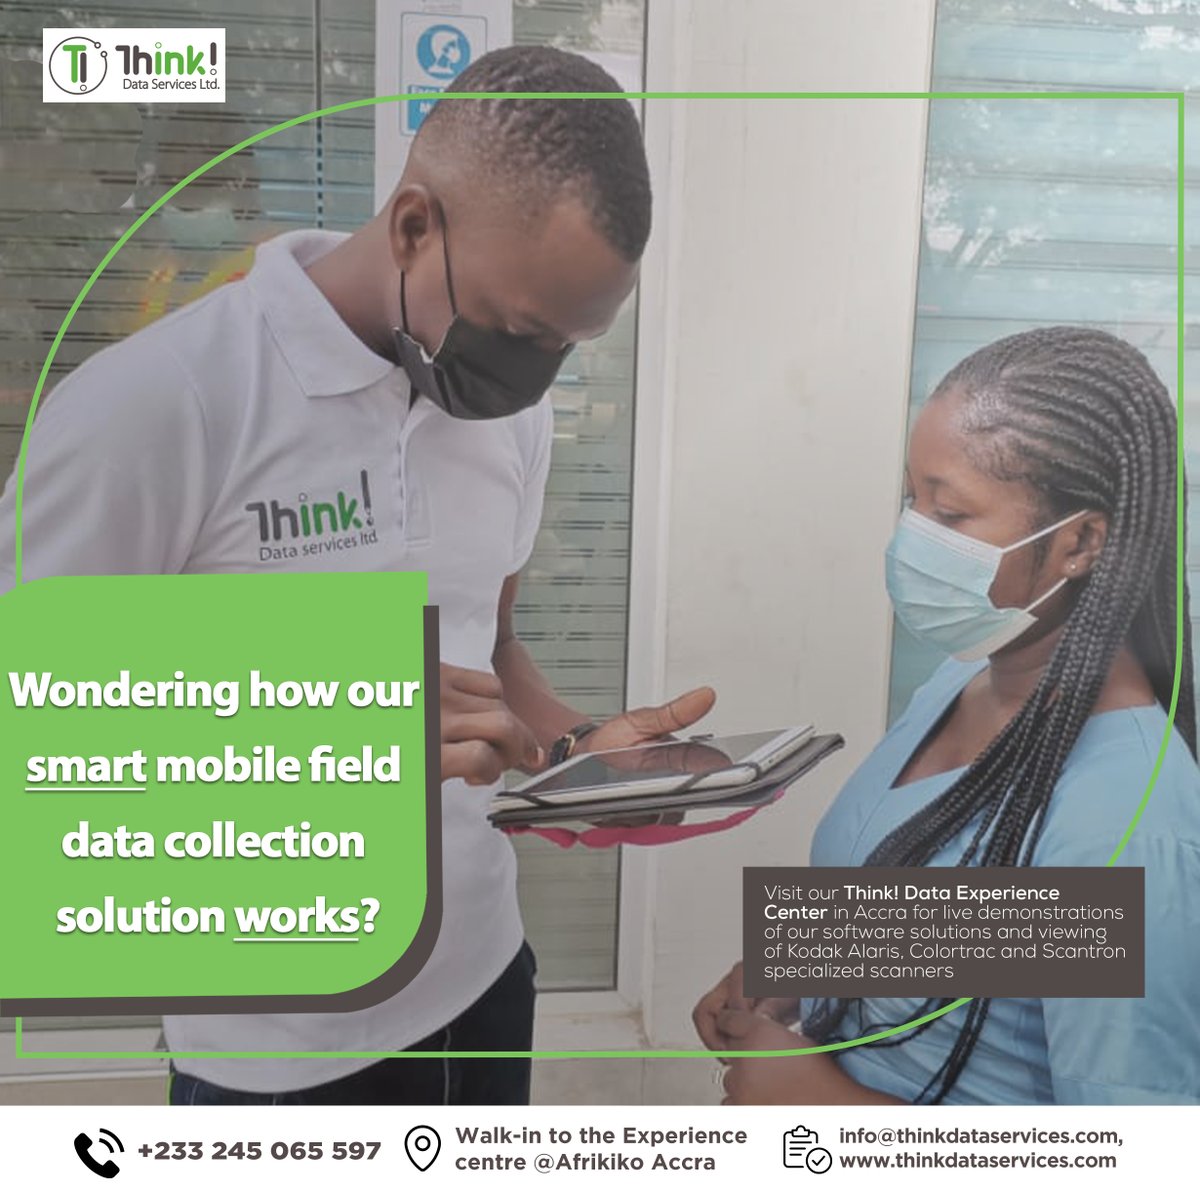 #HappyNewMonth
Are you looking for an #affordable and intuitive #datacollection application to take care of your field data collection needs? Visit: bit.ly/3GUqGe7 #Thinkdataservices #Poimapper #Africa #Agriculture #marketresearch #survey #qualityaudit #analytics